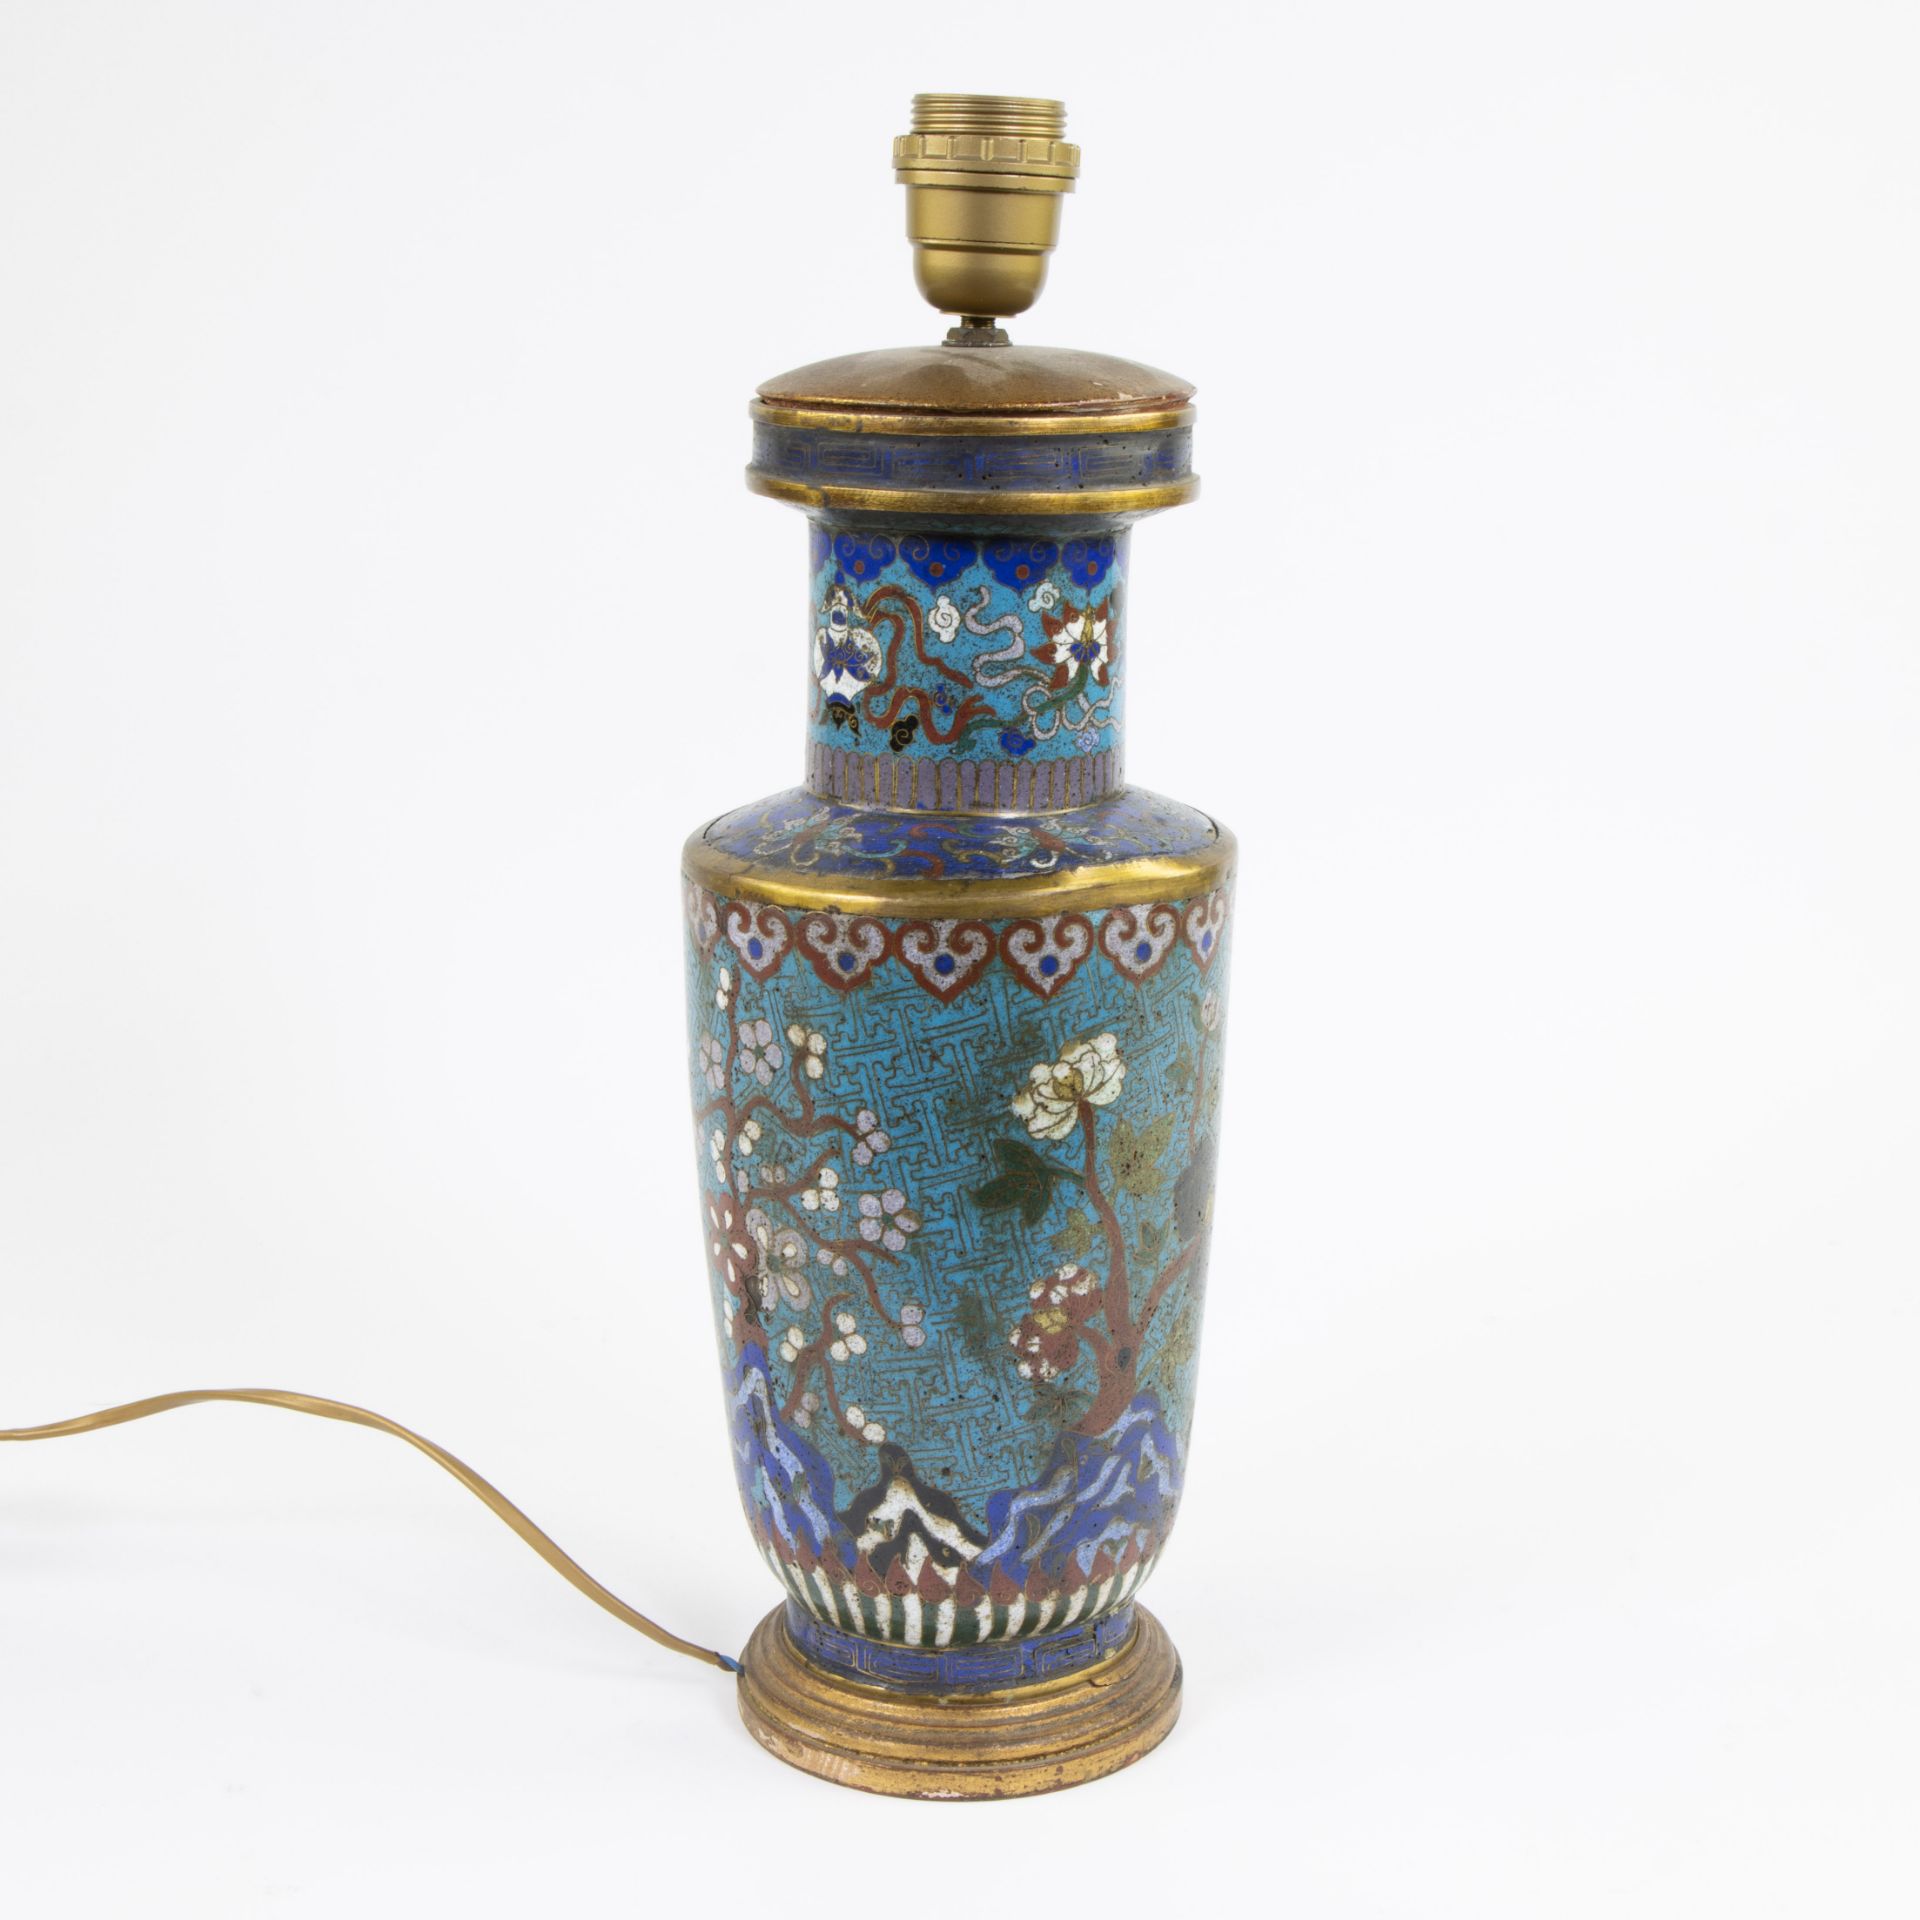 Cloisonné rouleau vase (made into a lamp) with decoration of prunus blossom, lotus and flowering shr - Image 4 of 4